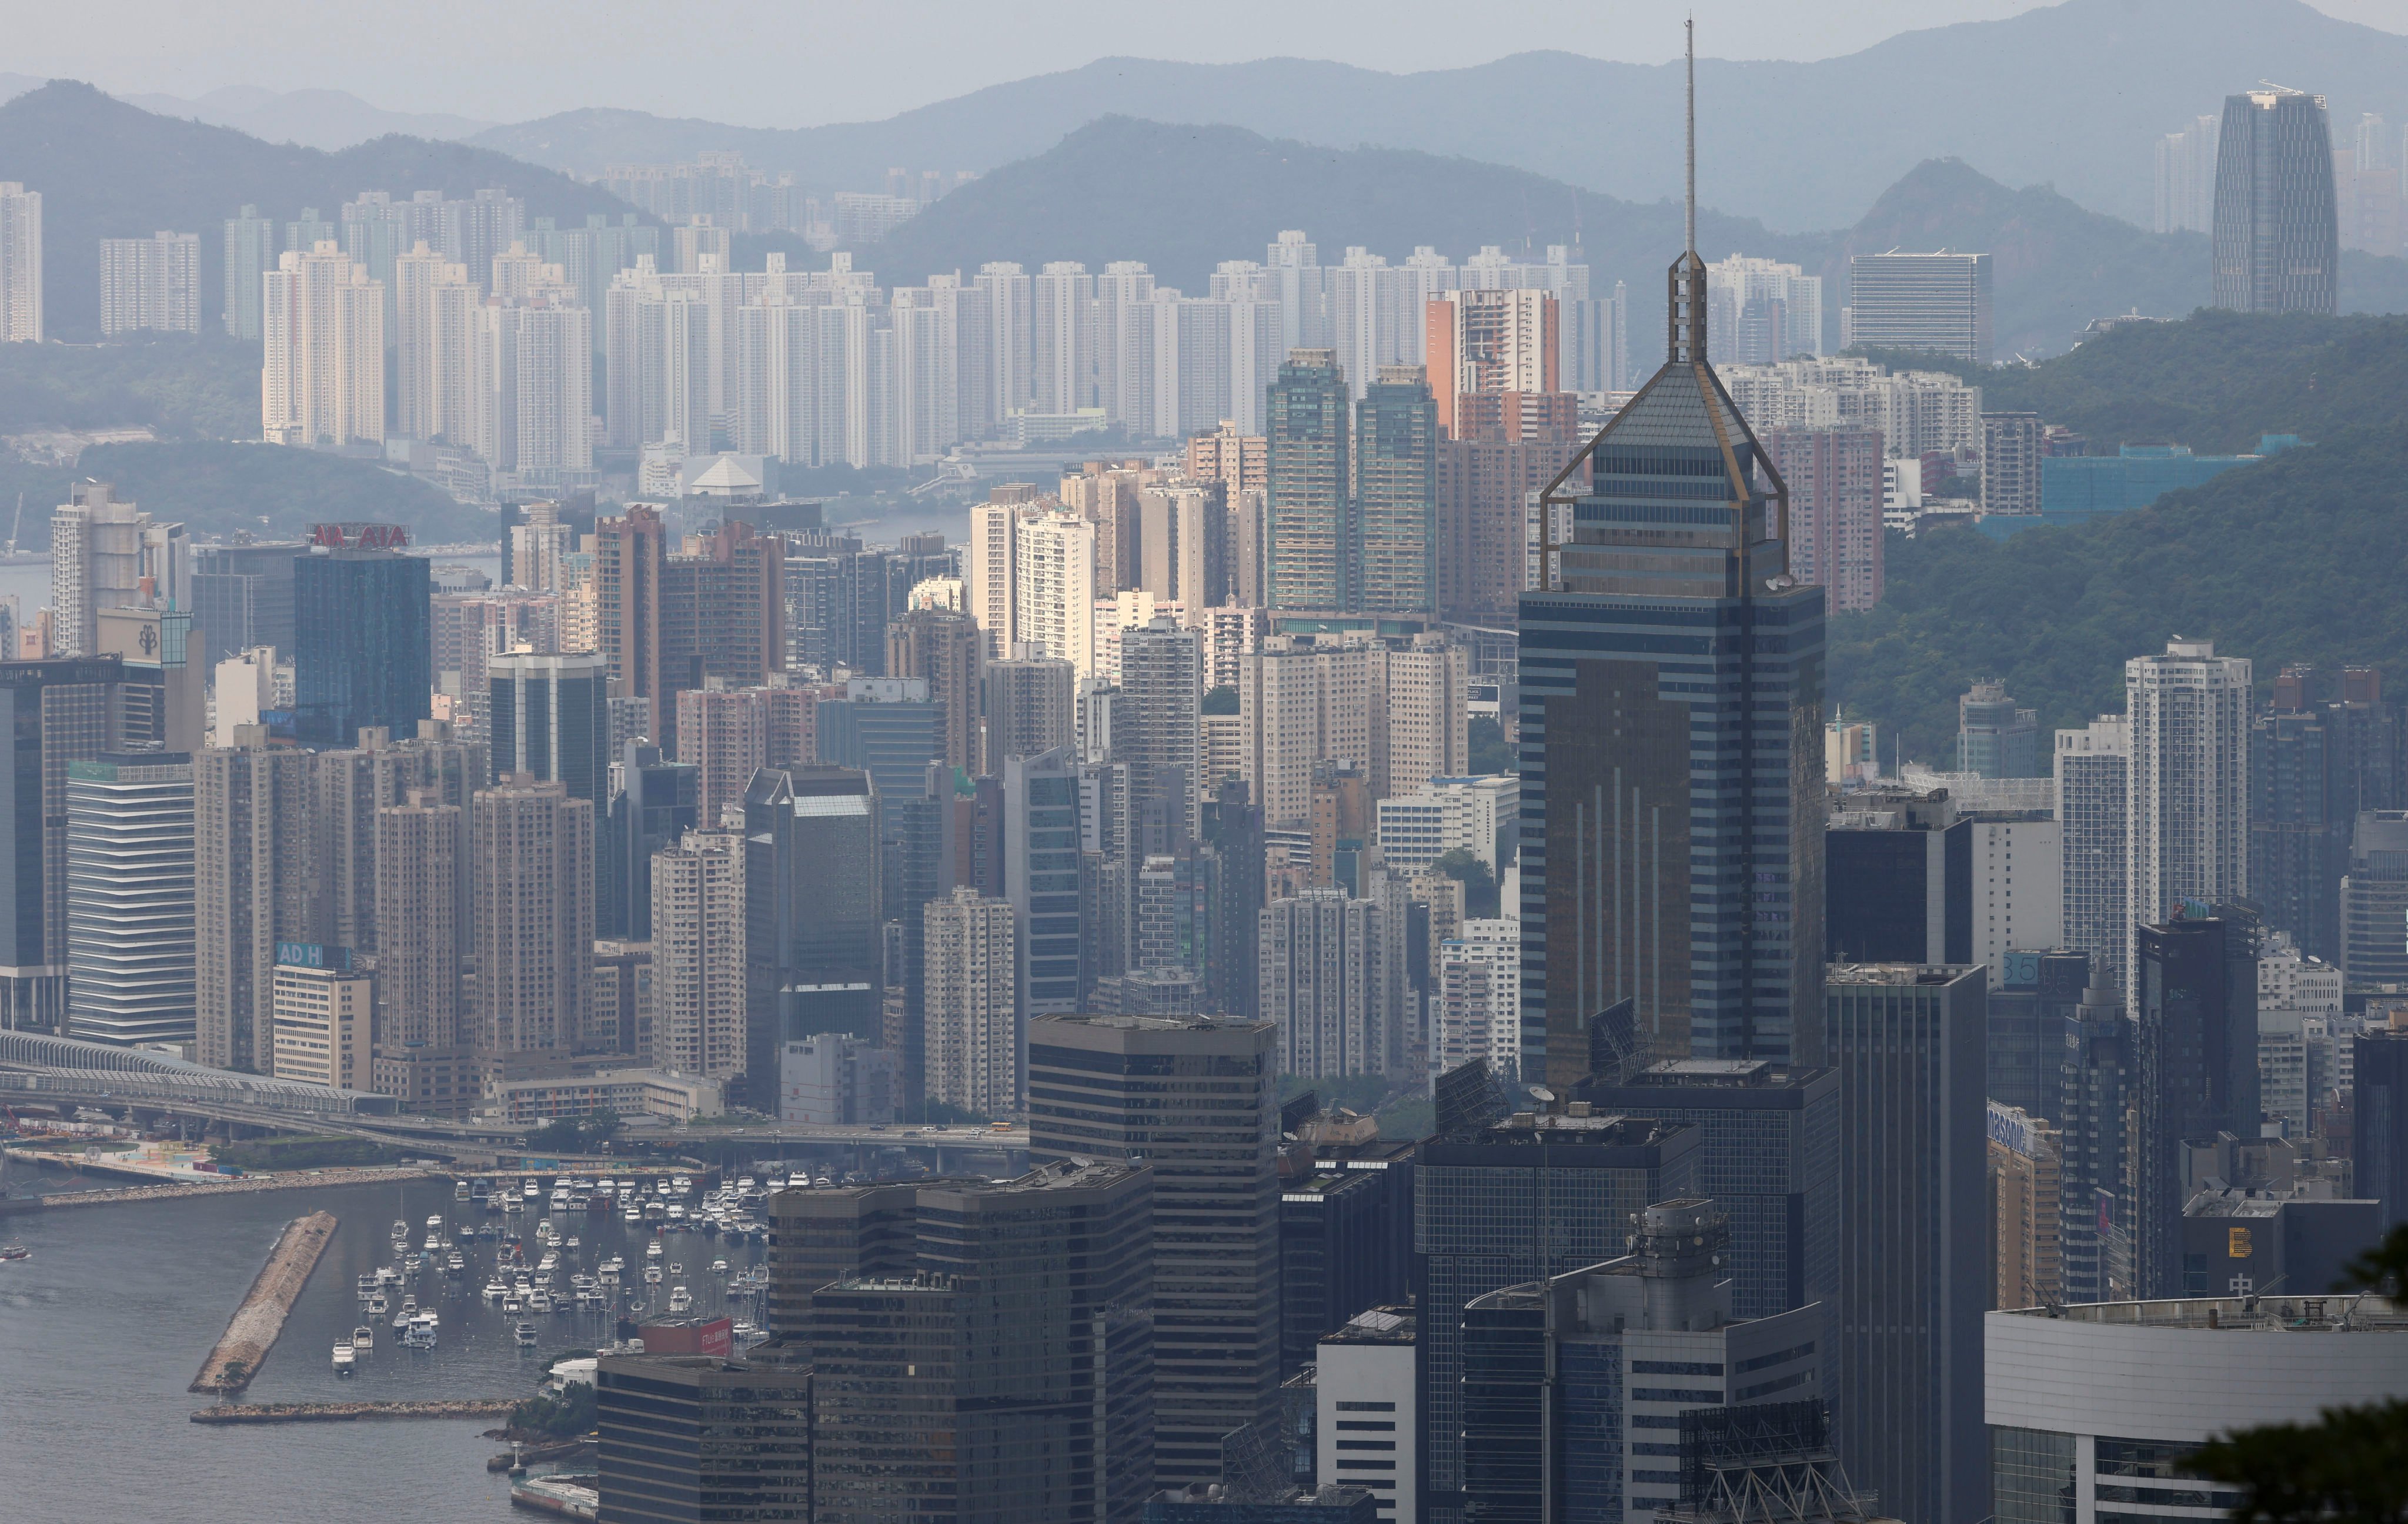 Hong Kong’s property market is undergoing an unusual period of weakness, but buyers eager to enter the market are having a difficult time finding owners willing to sell at current prices. Photo: Dickson Lee